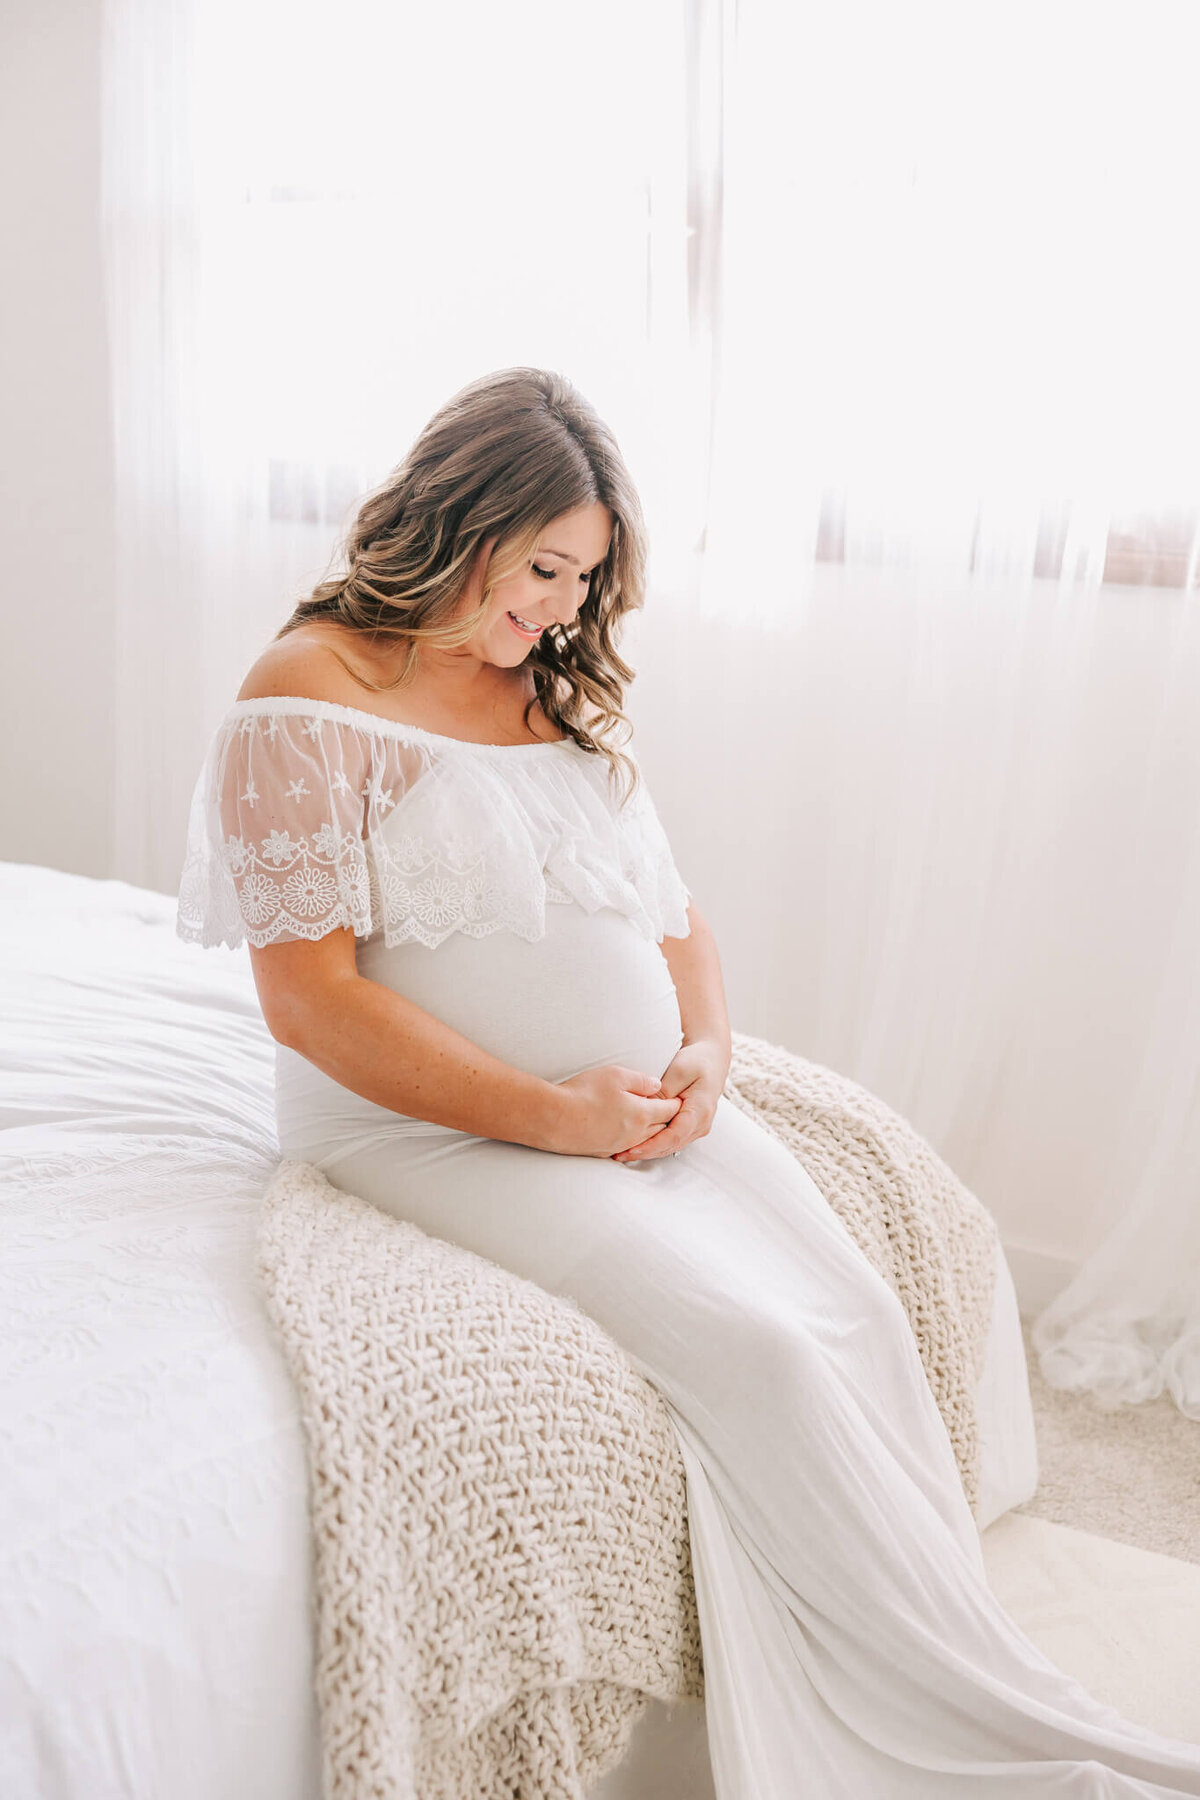 portland oregon woman sitting on bed in white dress smiling down at her pregnant belly